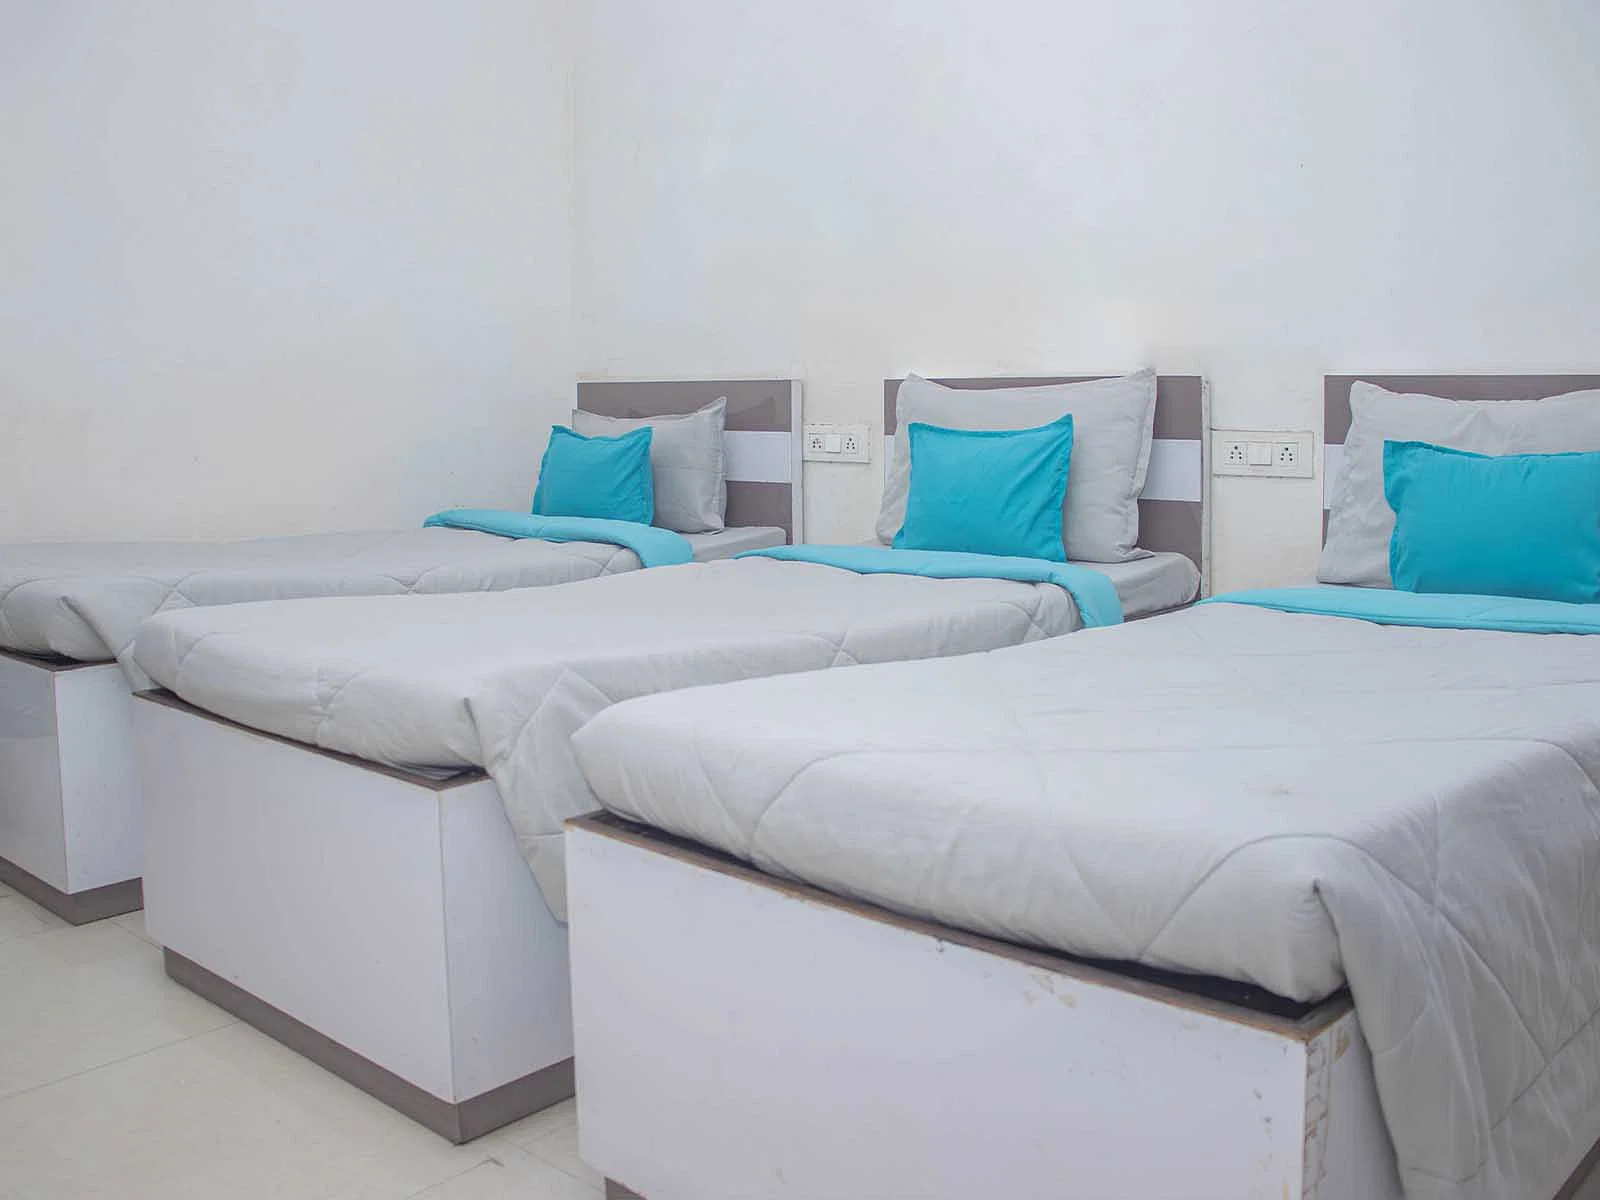 pgs in Sector 53 with Daily housekeeping facilities and free Wi-Fi-Zolo Bluebell